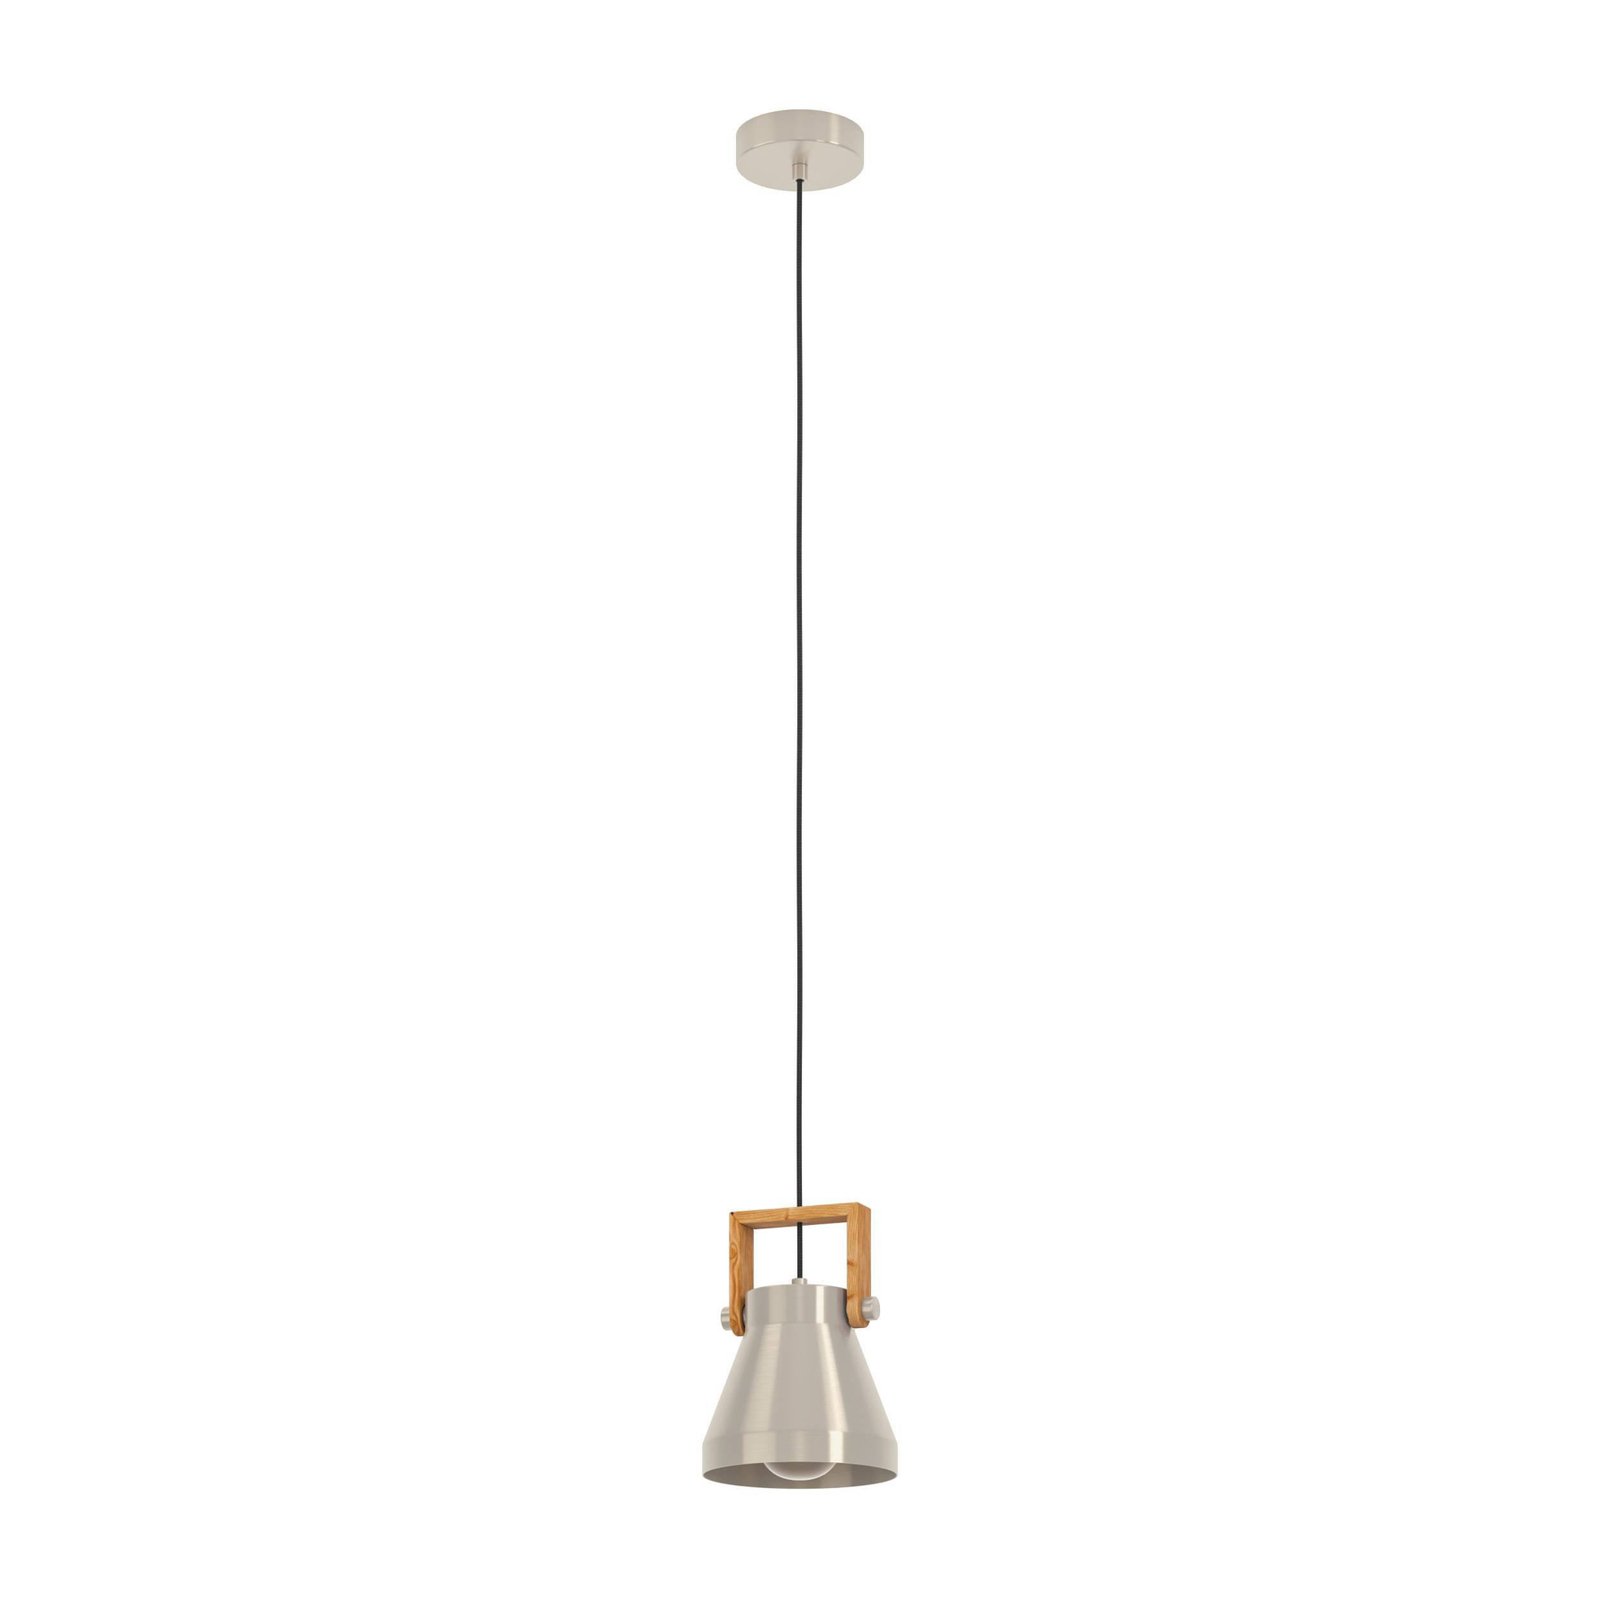 Cawton hanglamp, Ø 16 cm, staal/bruin, staal/hout